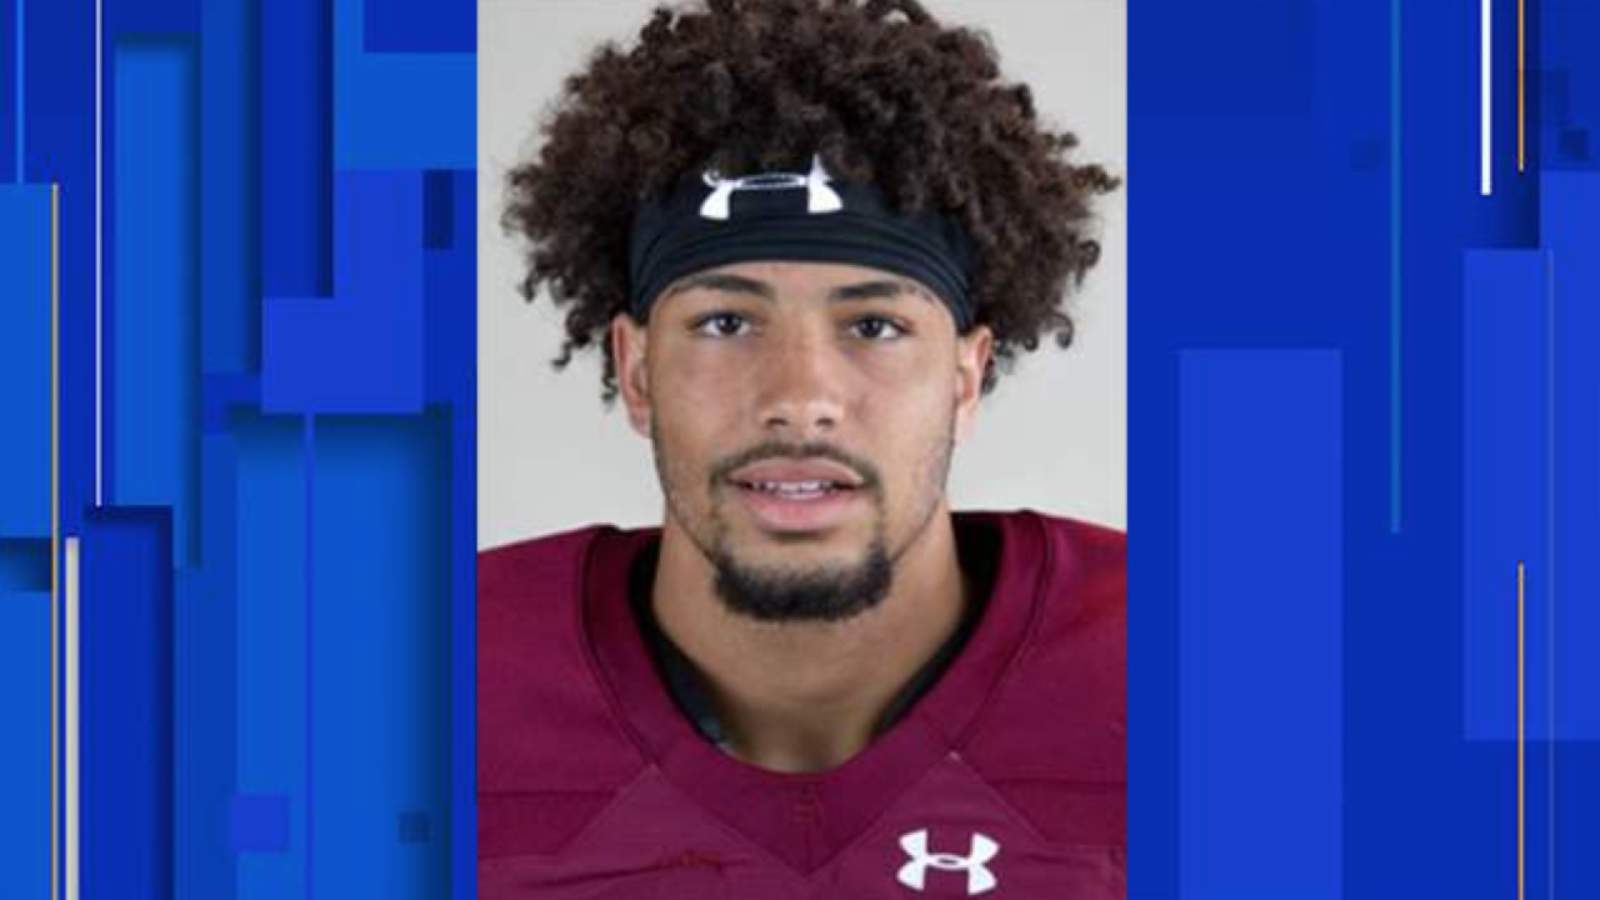 Suspects still sought in 2019 slaying of 19-year-old former Madison HS football star